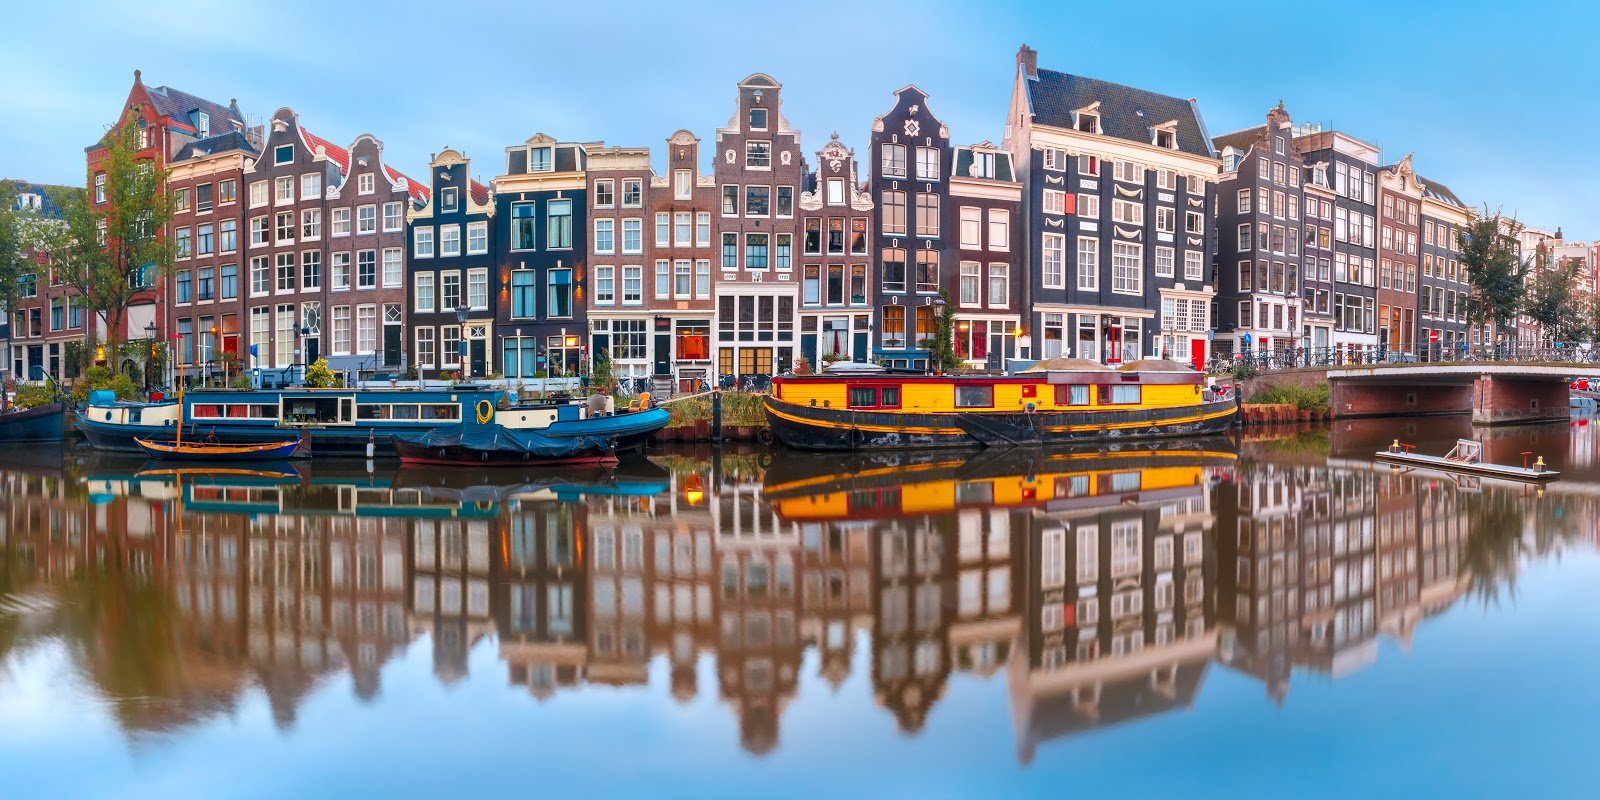 How Ethnically Diverse Is Amsterdam?